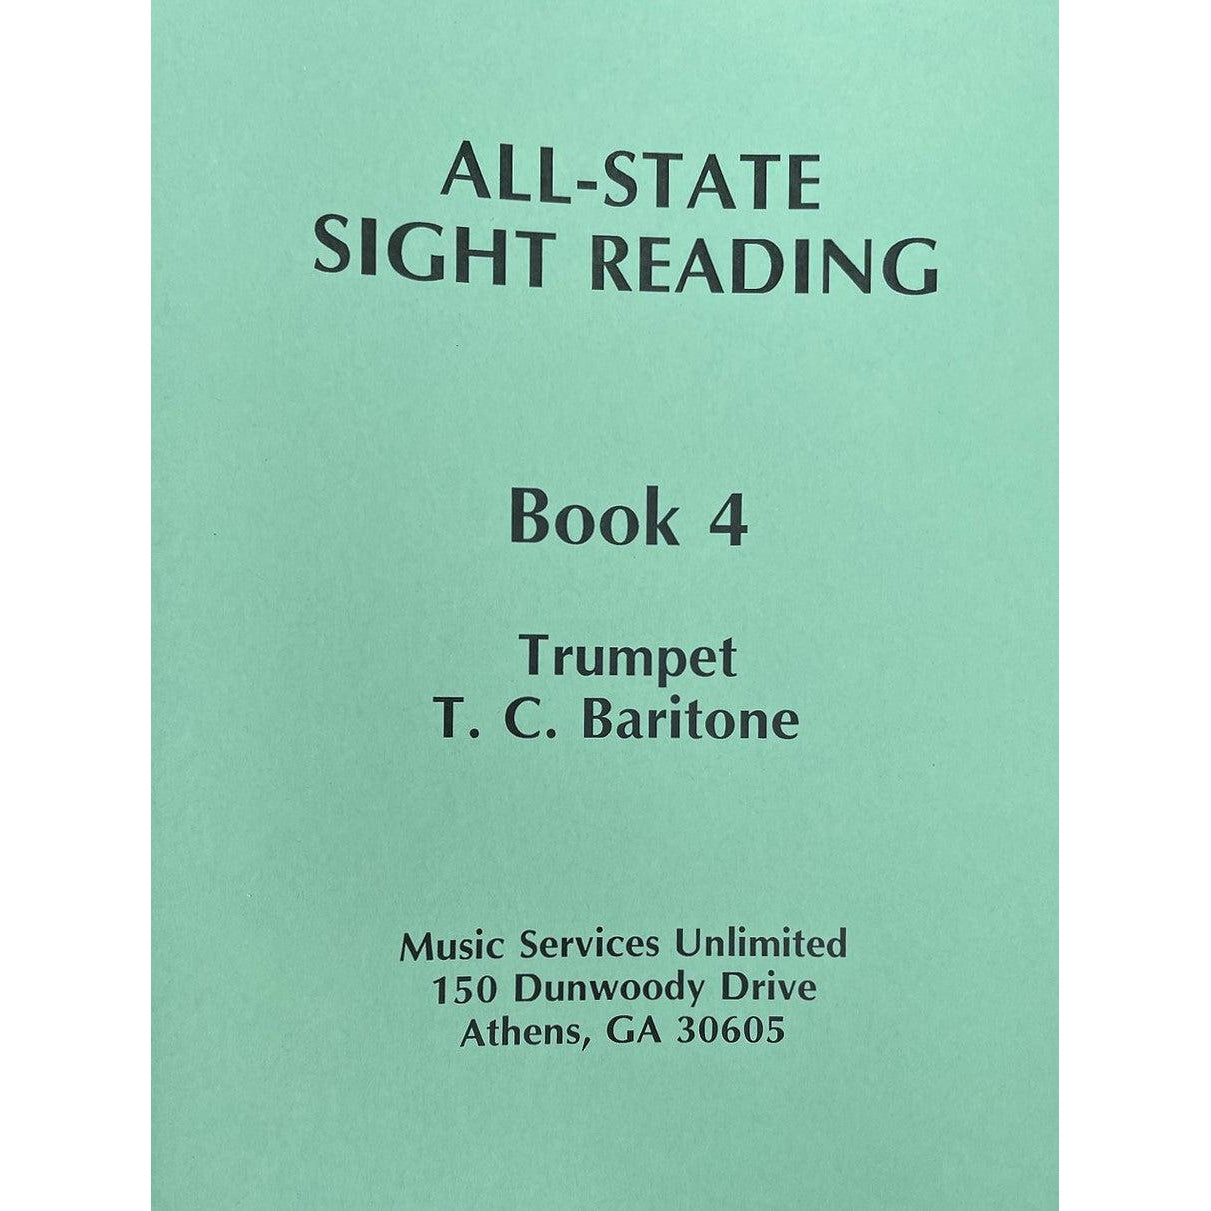 All-State Sight Reading-Trumpet/BaritoneTC-Andy's Music